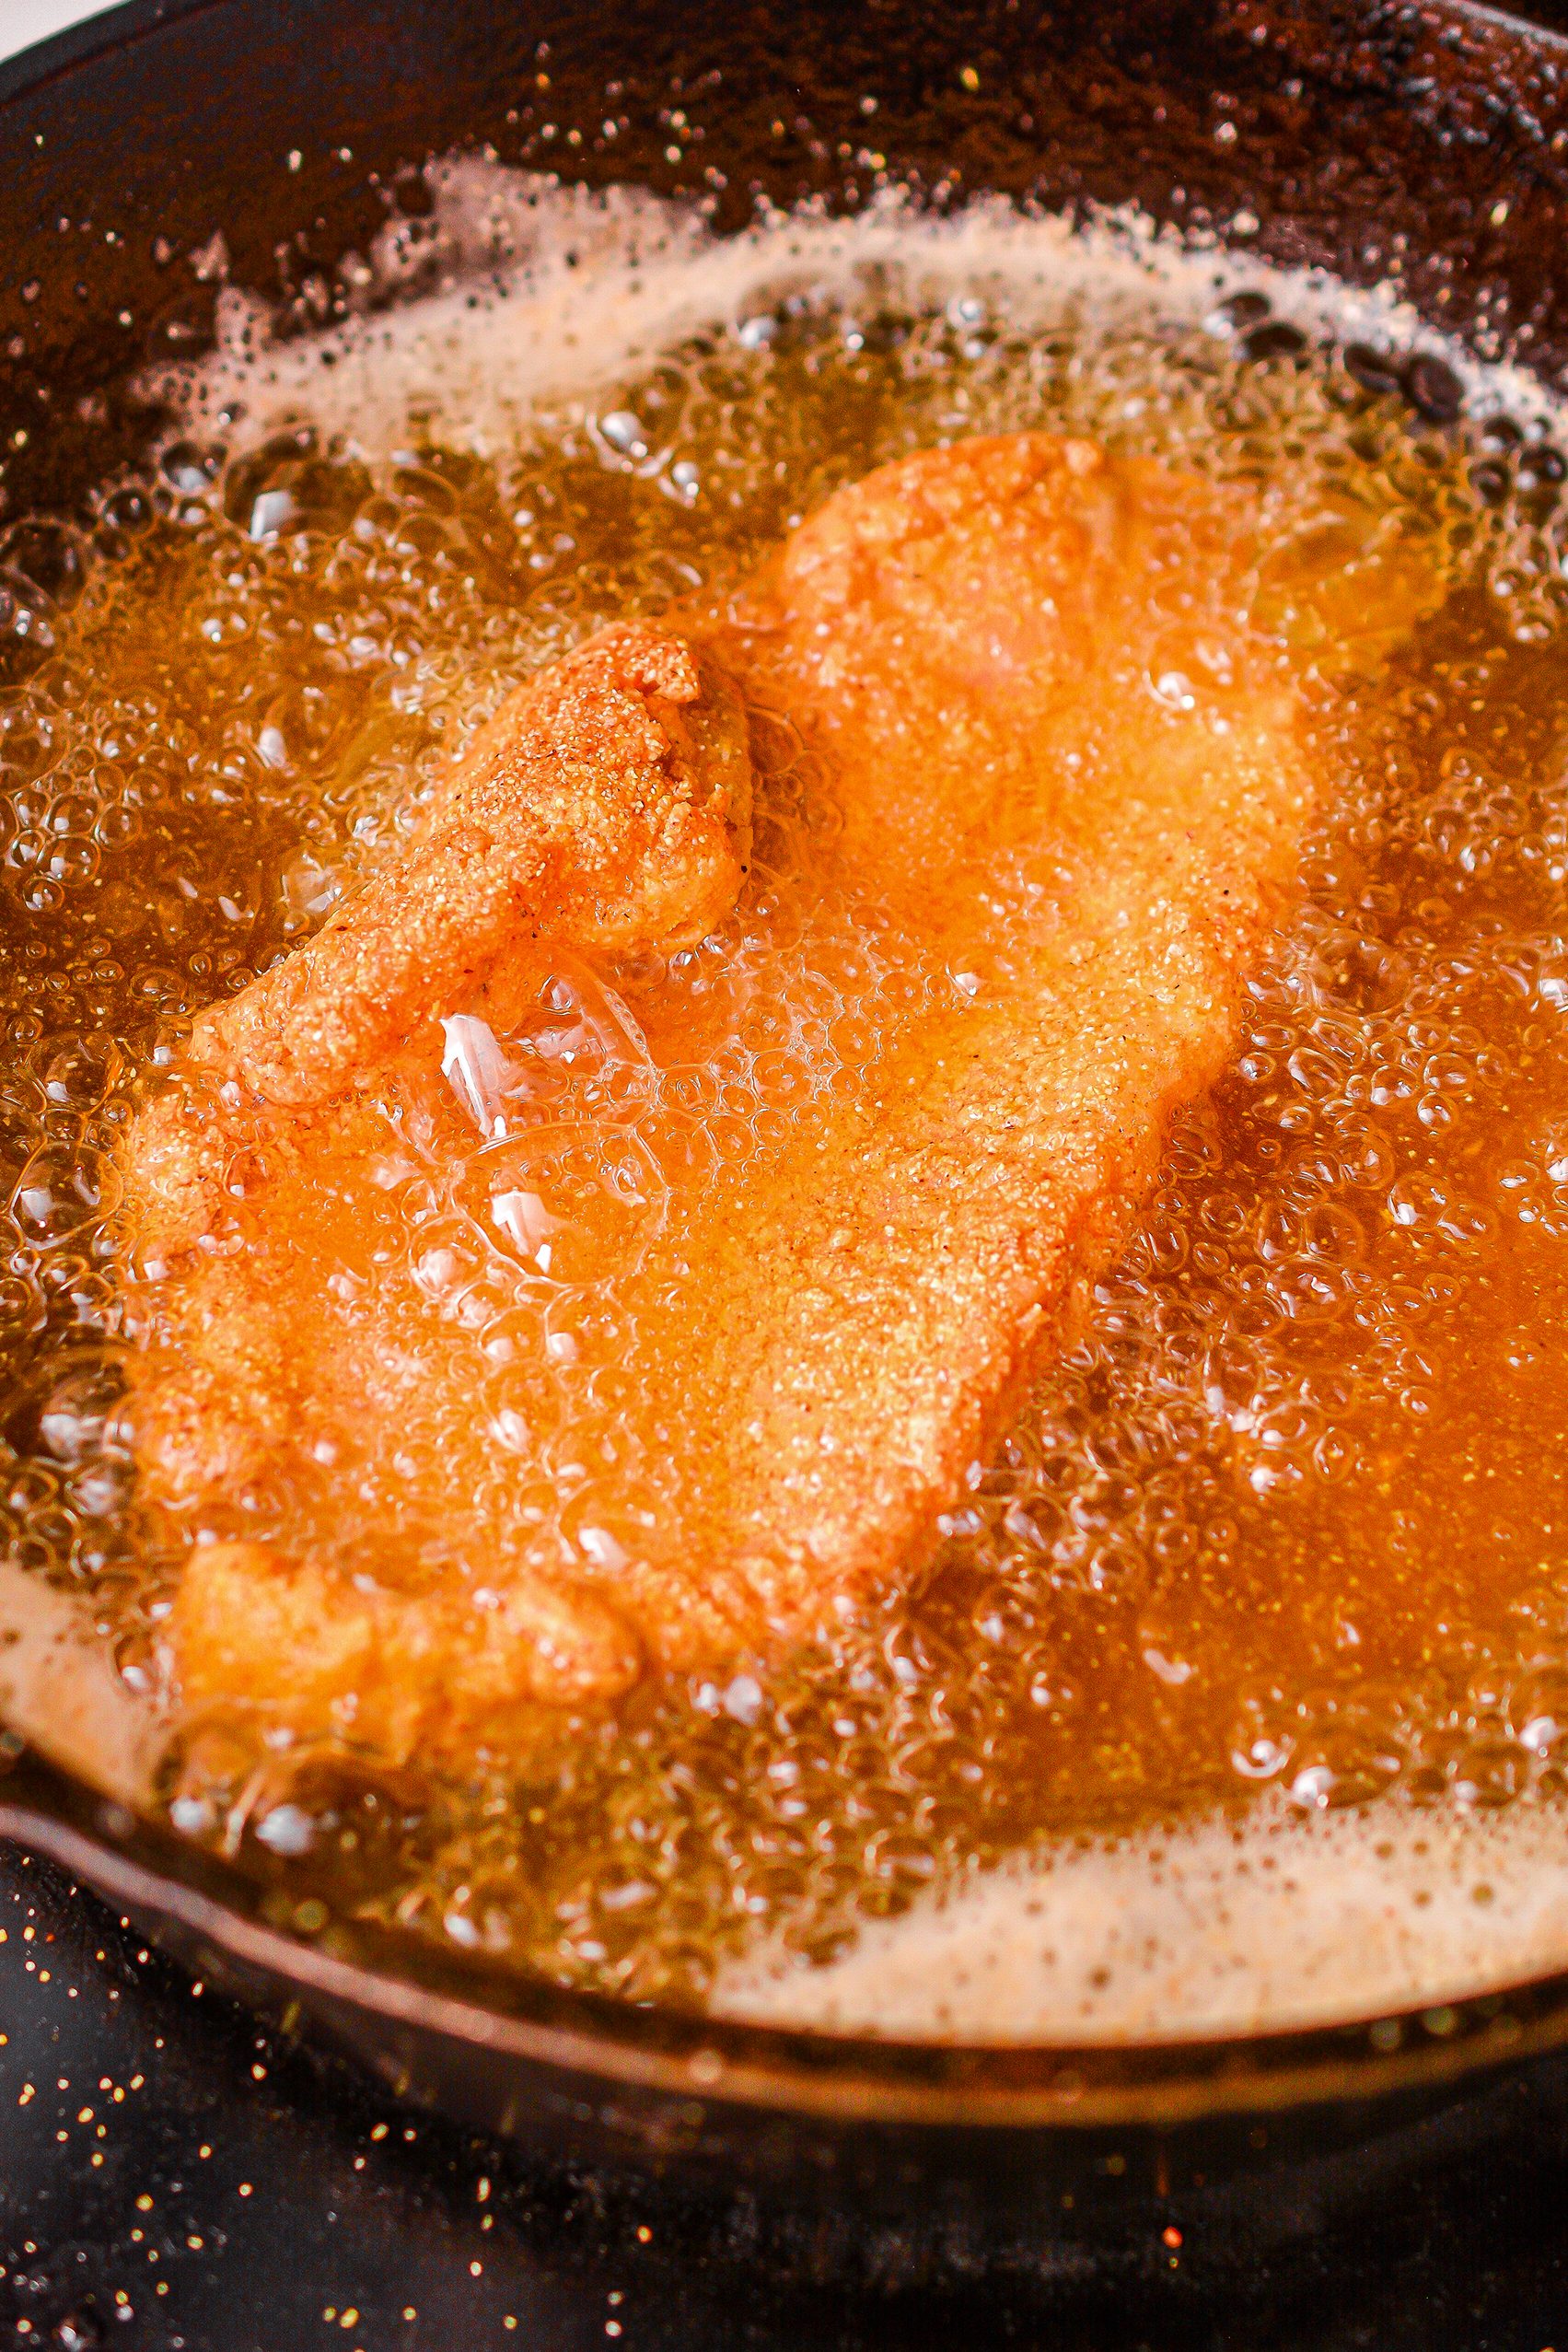 Heat several inches of oil in a deep-sided skillet over medium-high heat on the stove until the oil reaches 350 degrees.